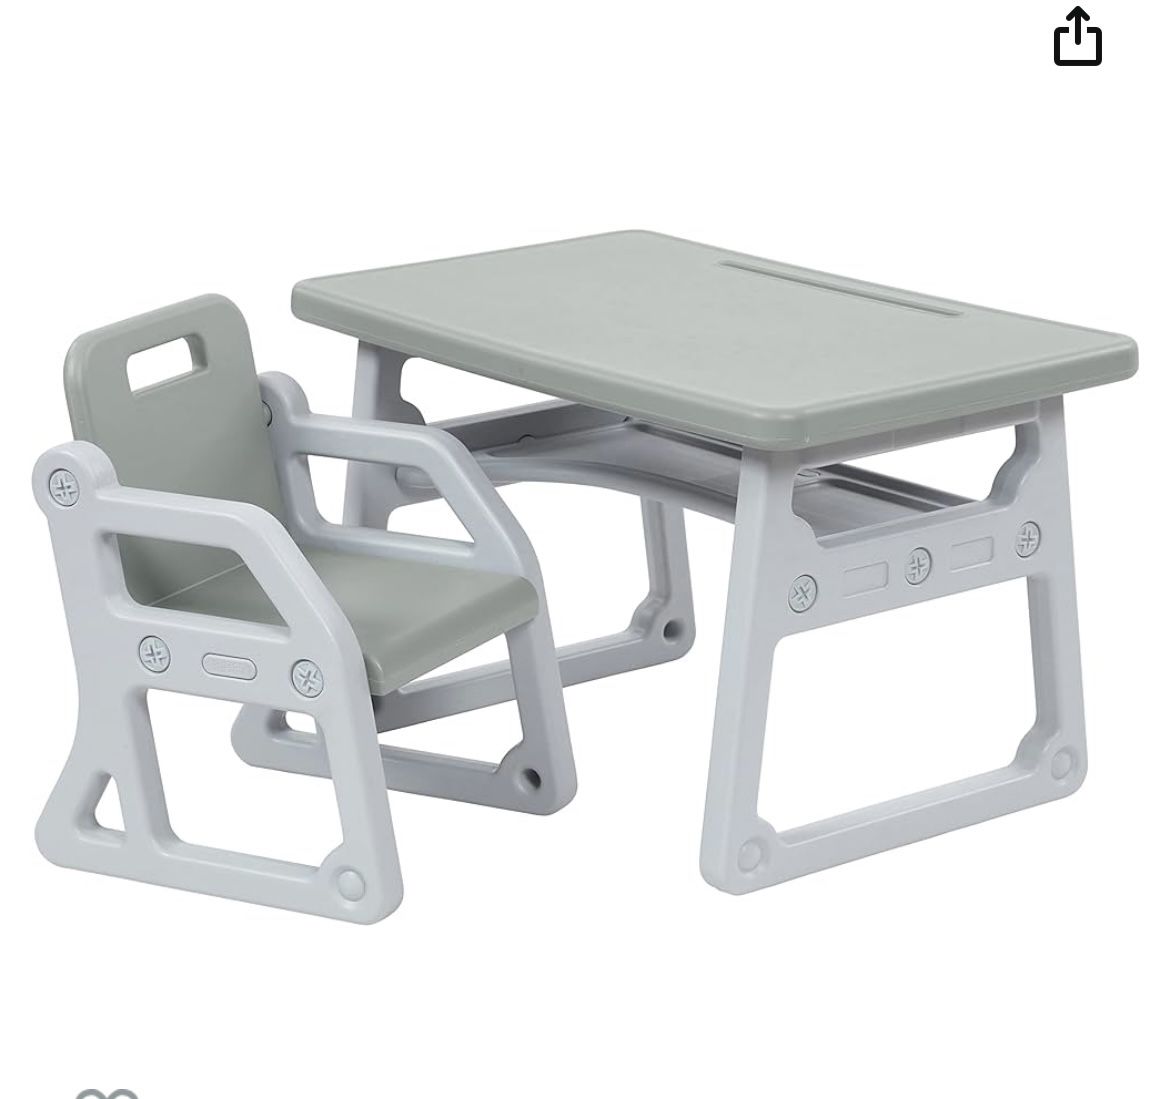 Toddler Plus Desk And Chair 